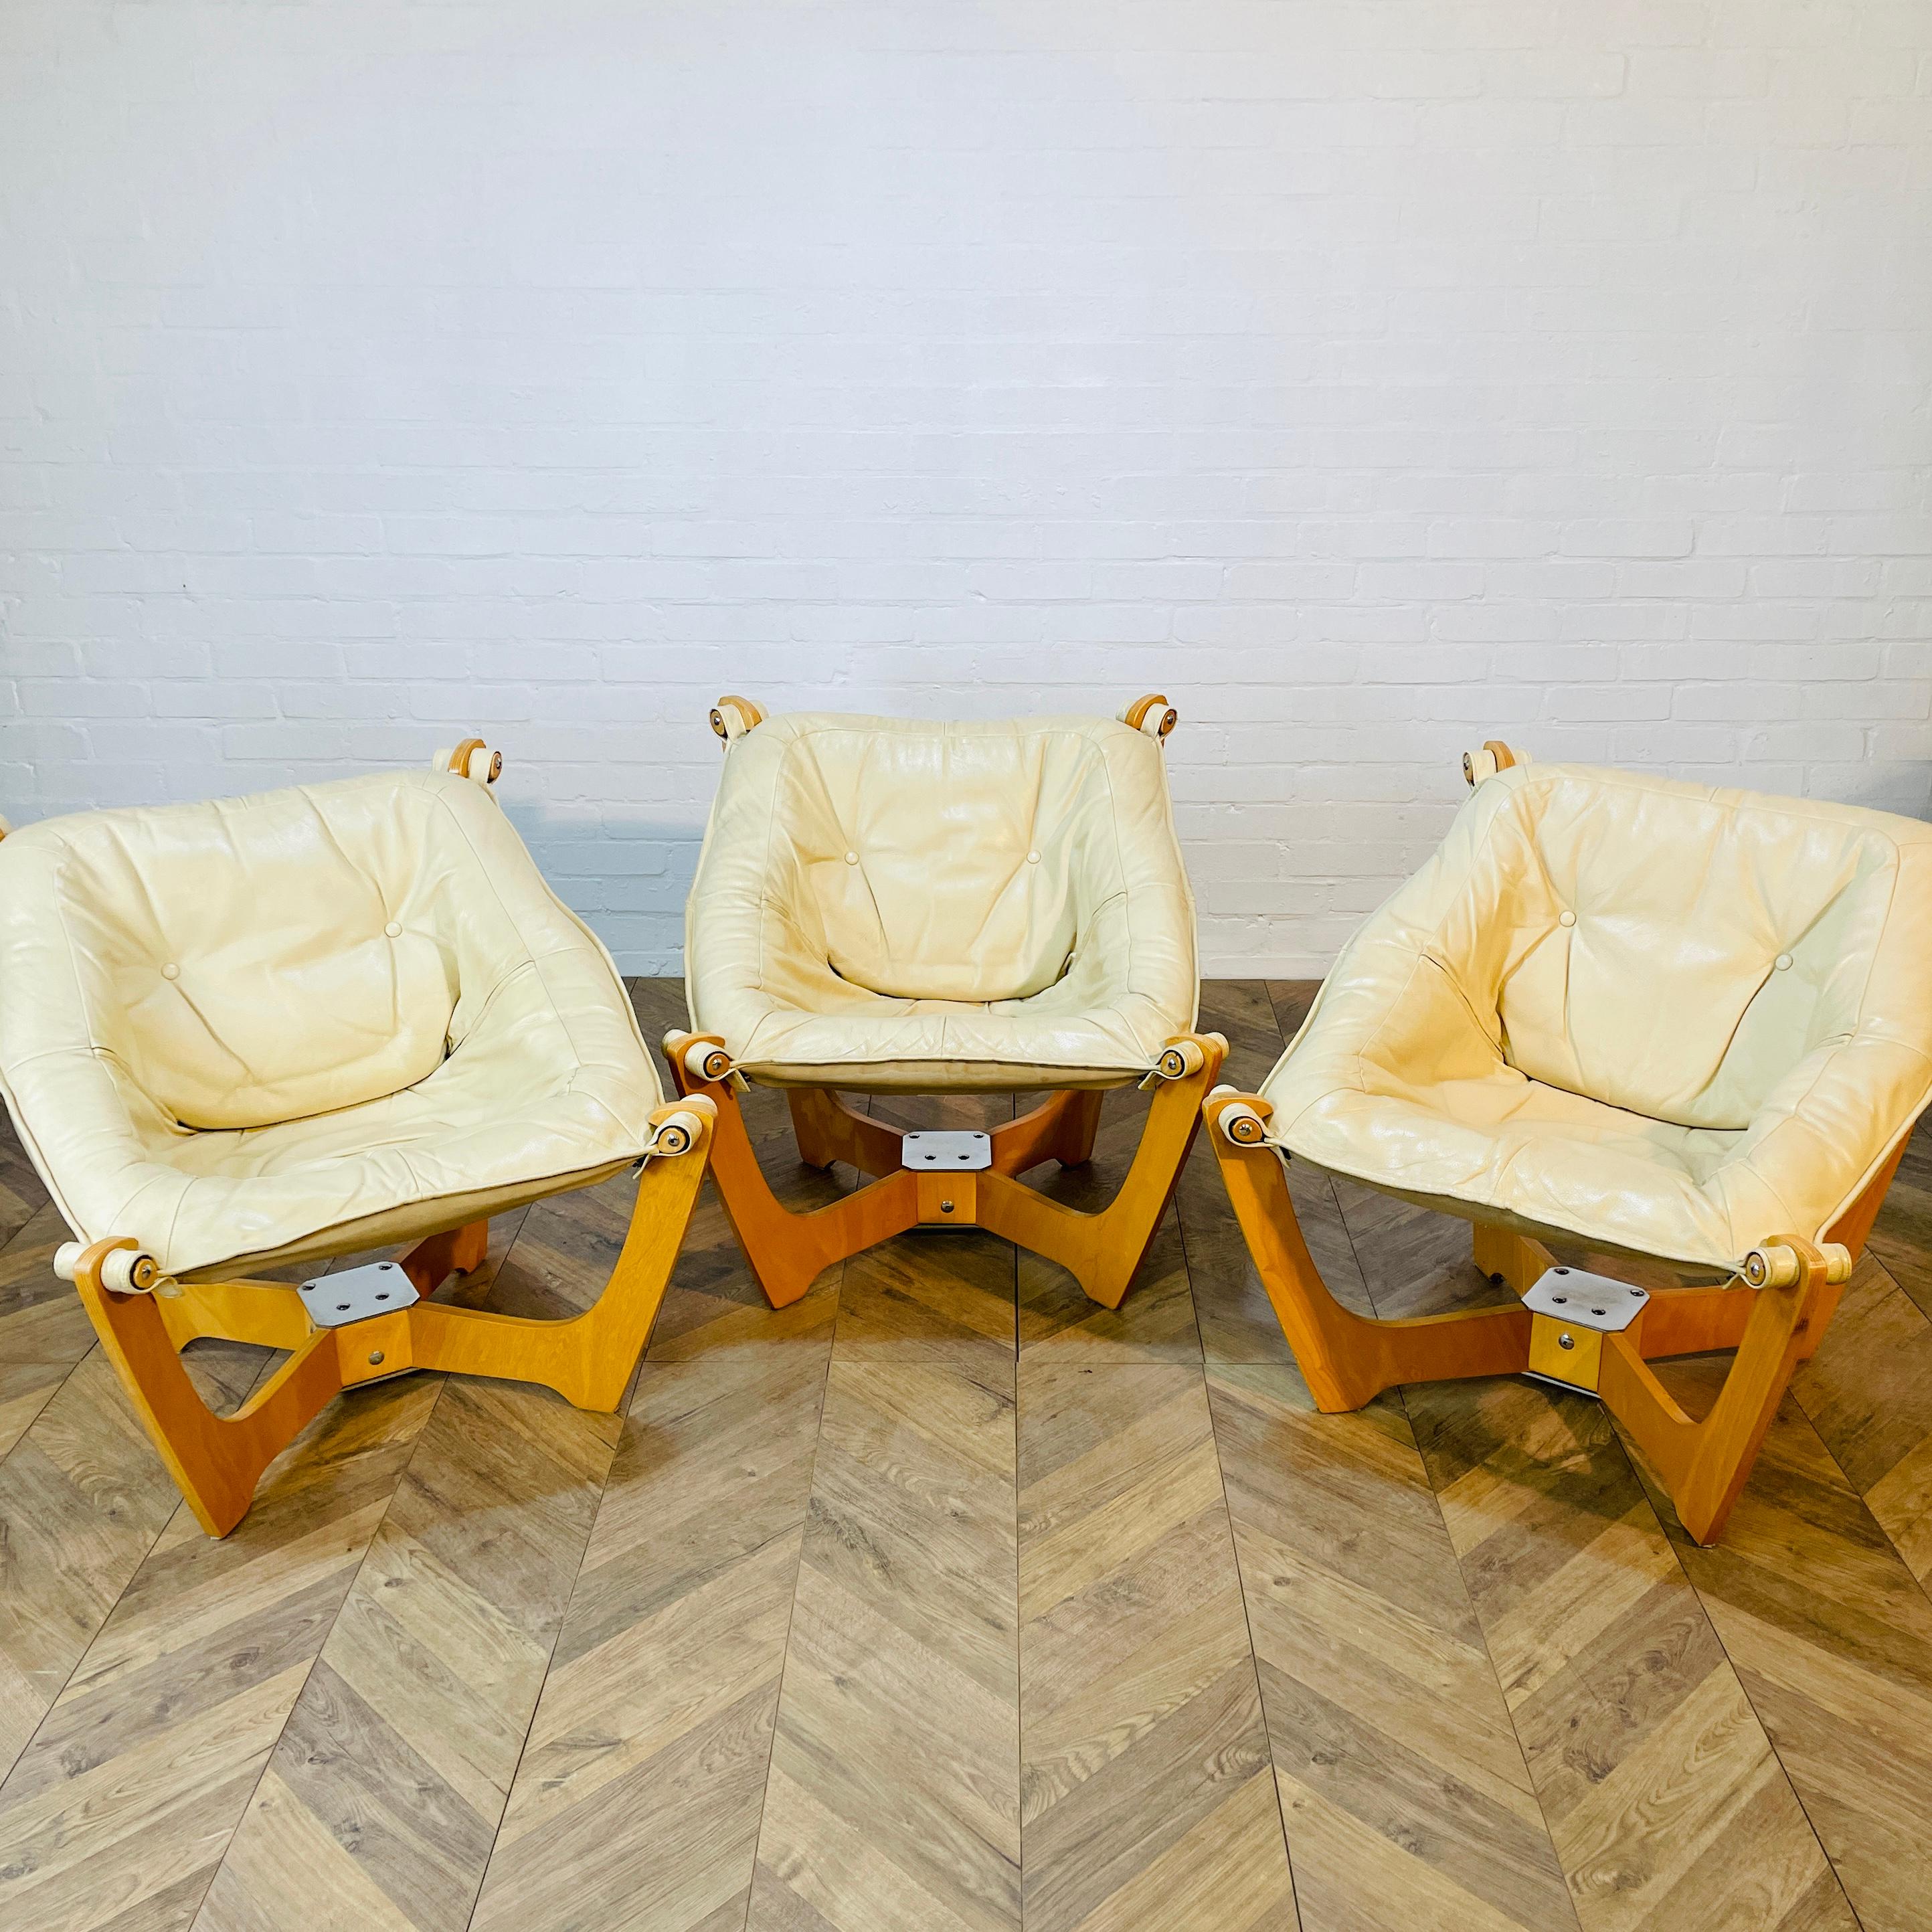 A Stylish Set of 3, Luna Chairs by Norwegian Designer, Odd Knutsen.

Originally designed in the 1970s, production ran through to the 90s.

The chairs, which are super comfortable, are upholstered in beige / cream leather with button detailing and